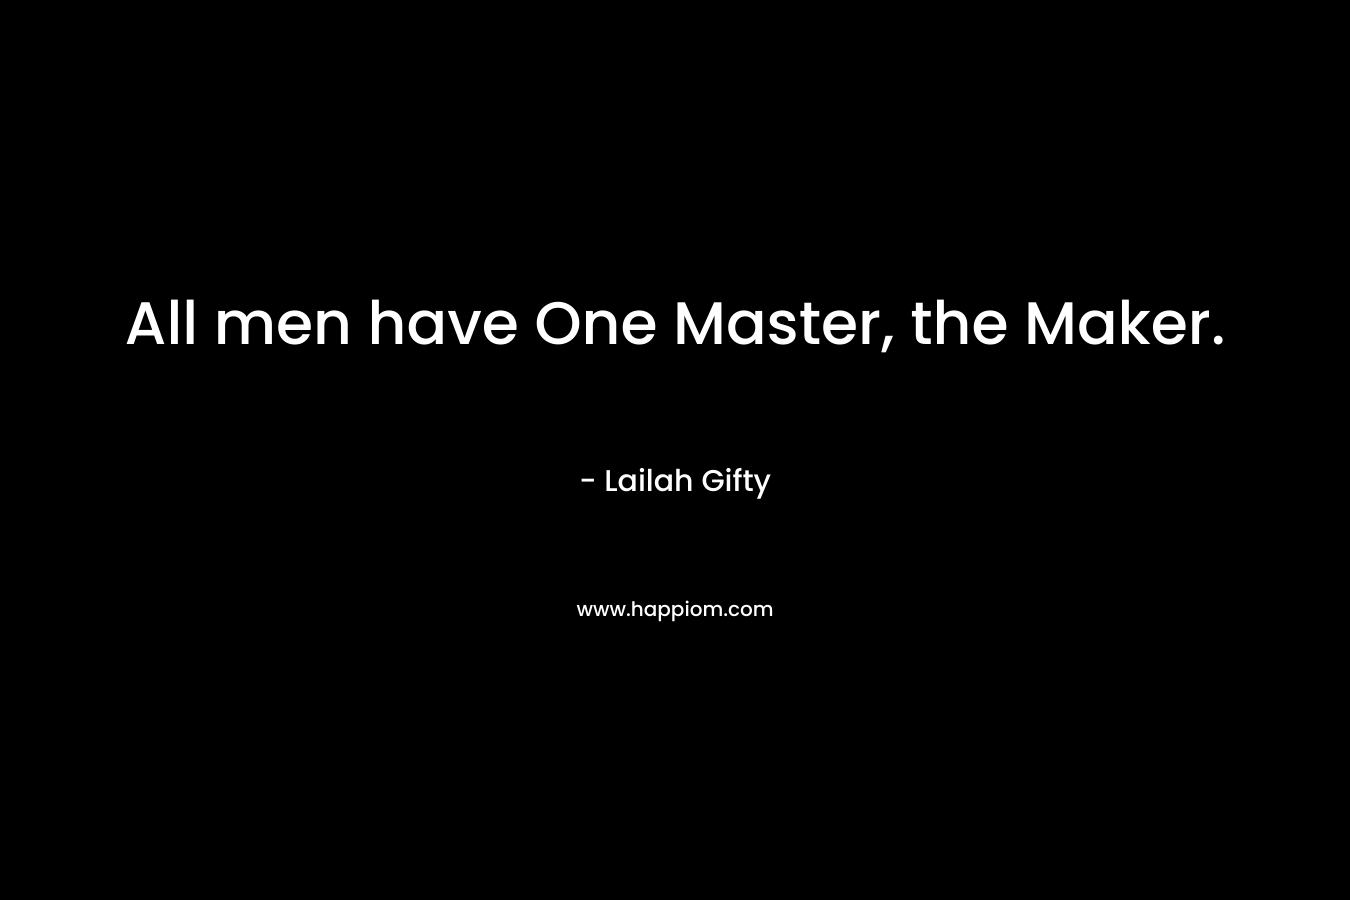 All men have One Master, the Maker. – Lailah Gifty